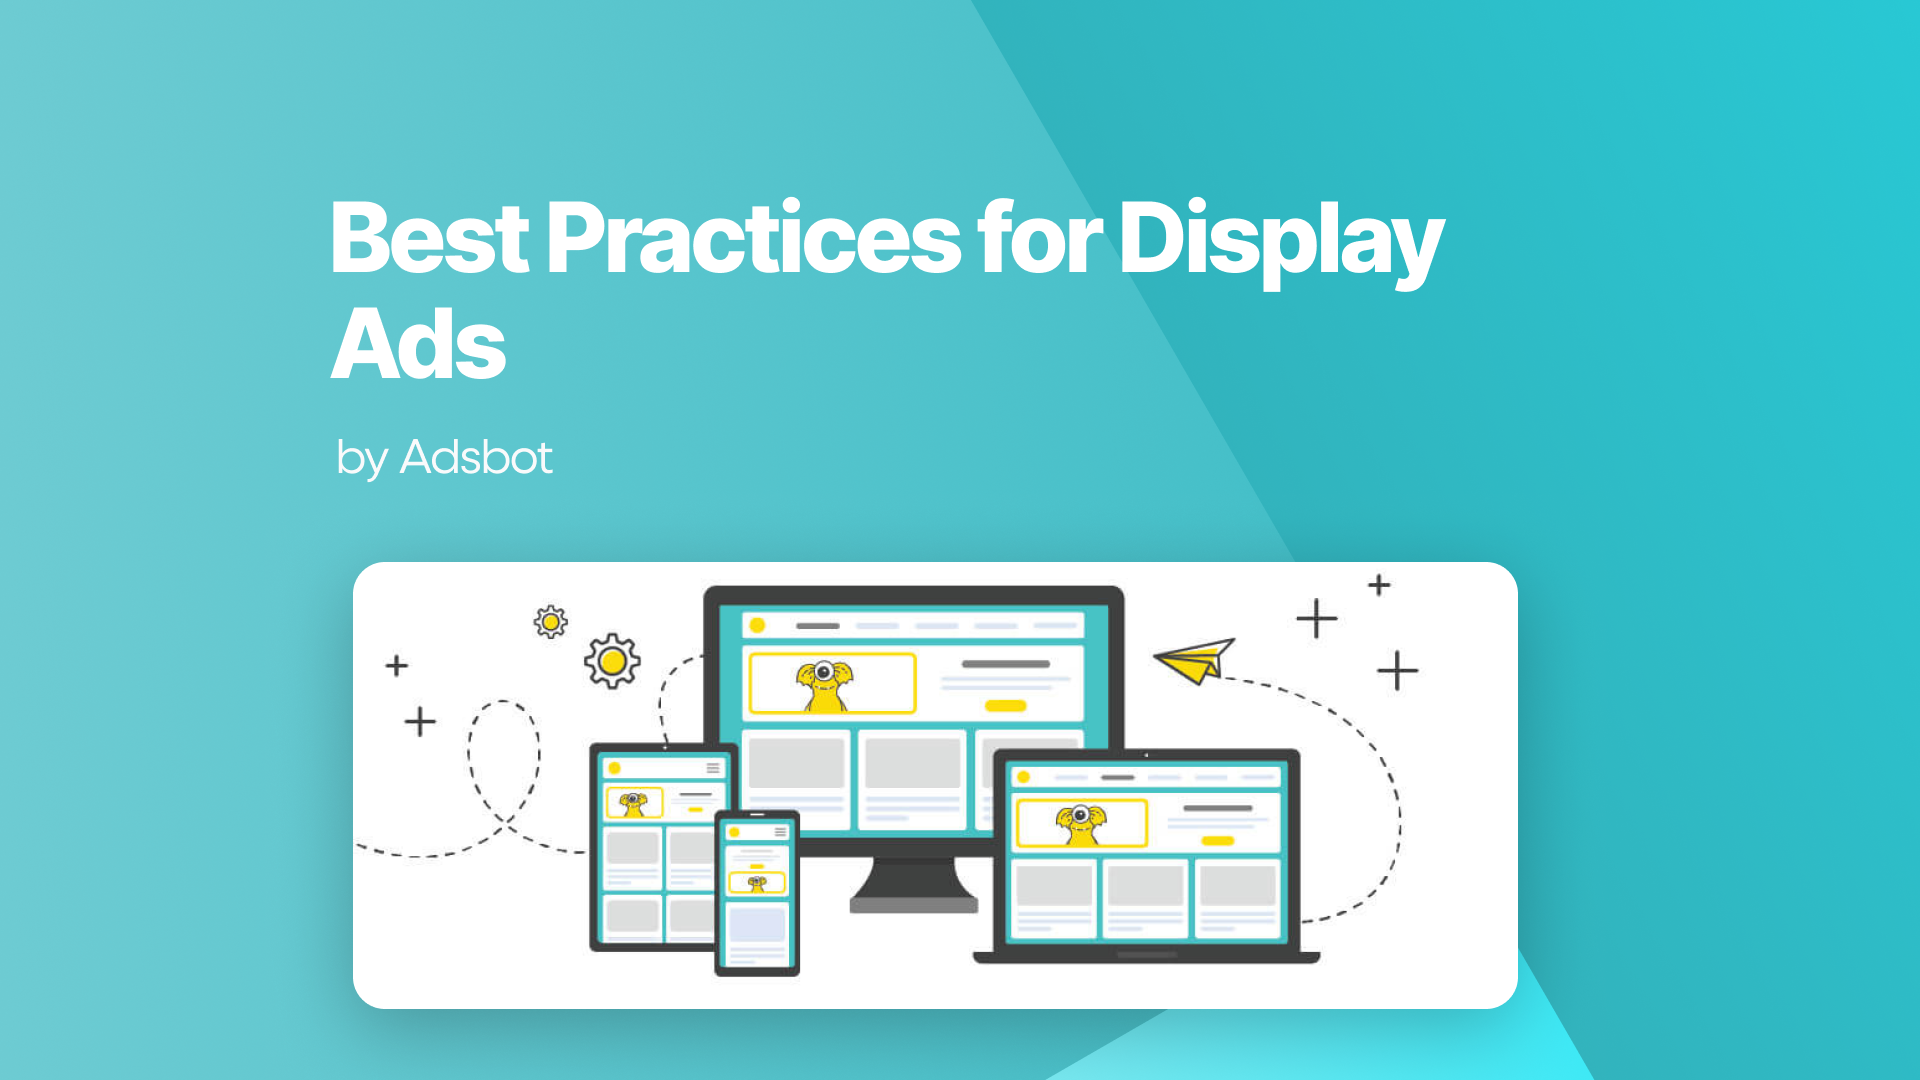 Best Practices for Display Ads